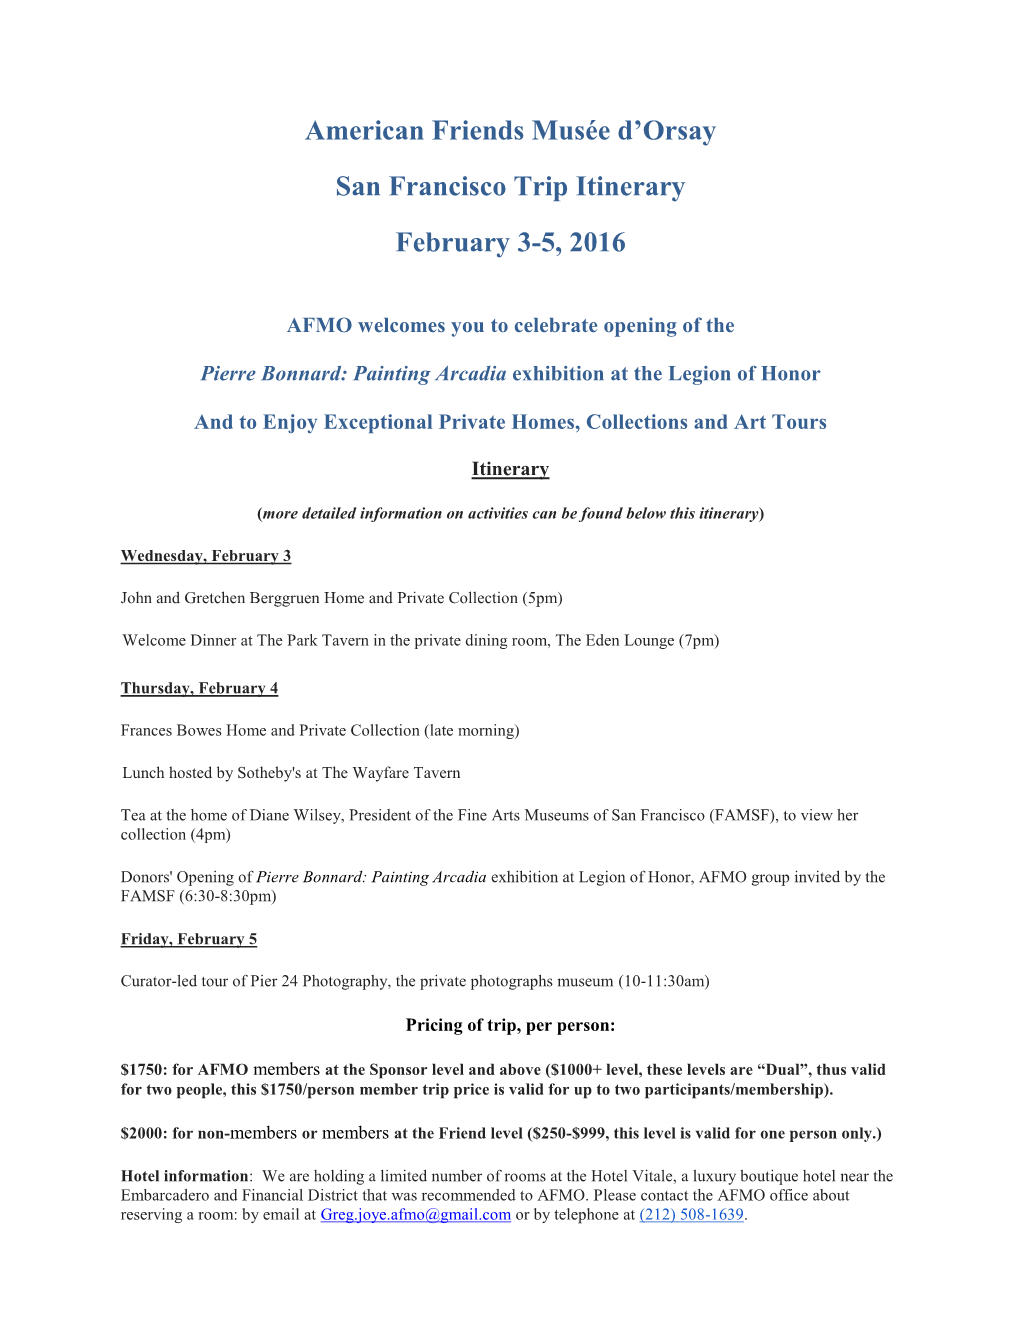 American Friends Musée D'orsay San Francisco Trip Itinerary February 3